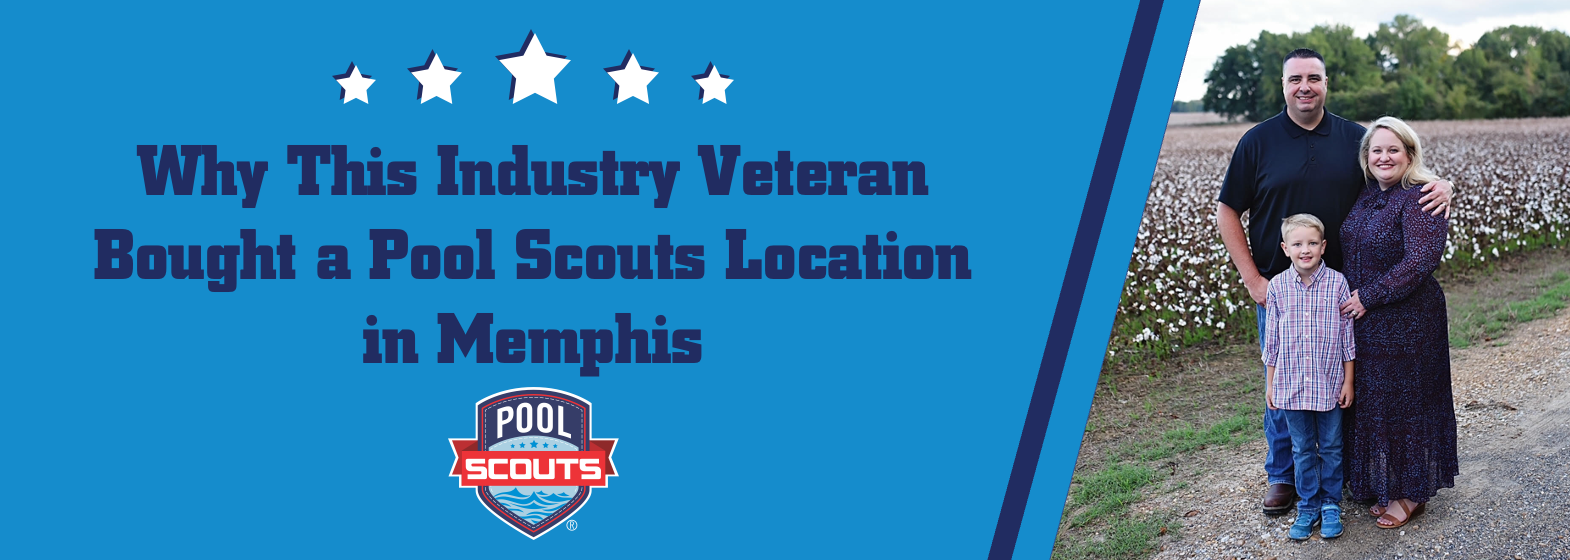 Image of Why This Franchise Industry Veteran Bought a Pool Scouts Location in Memphis